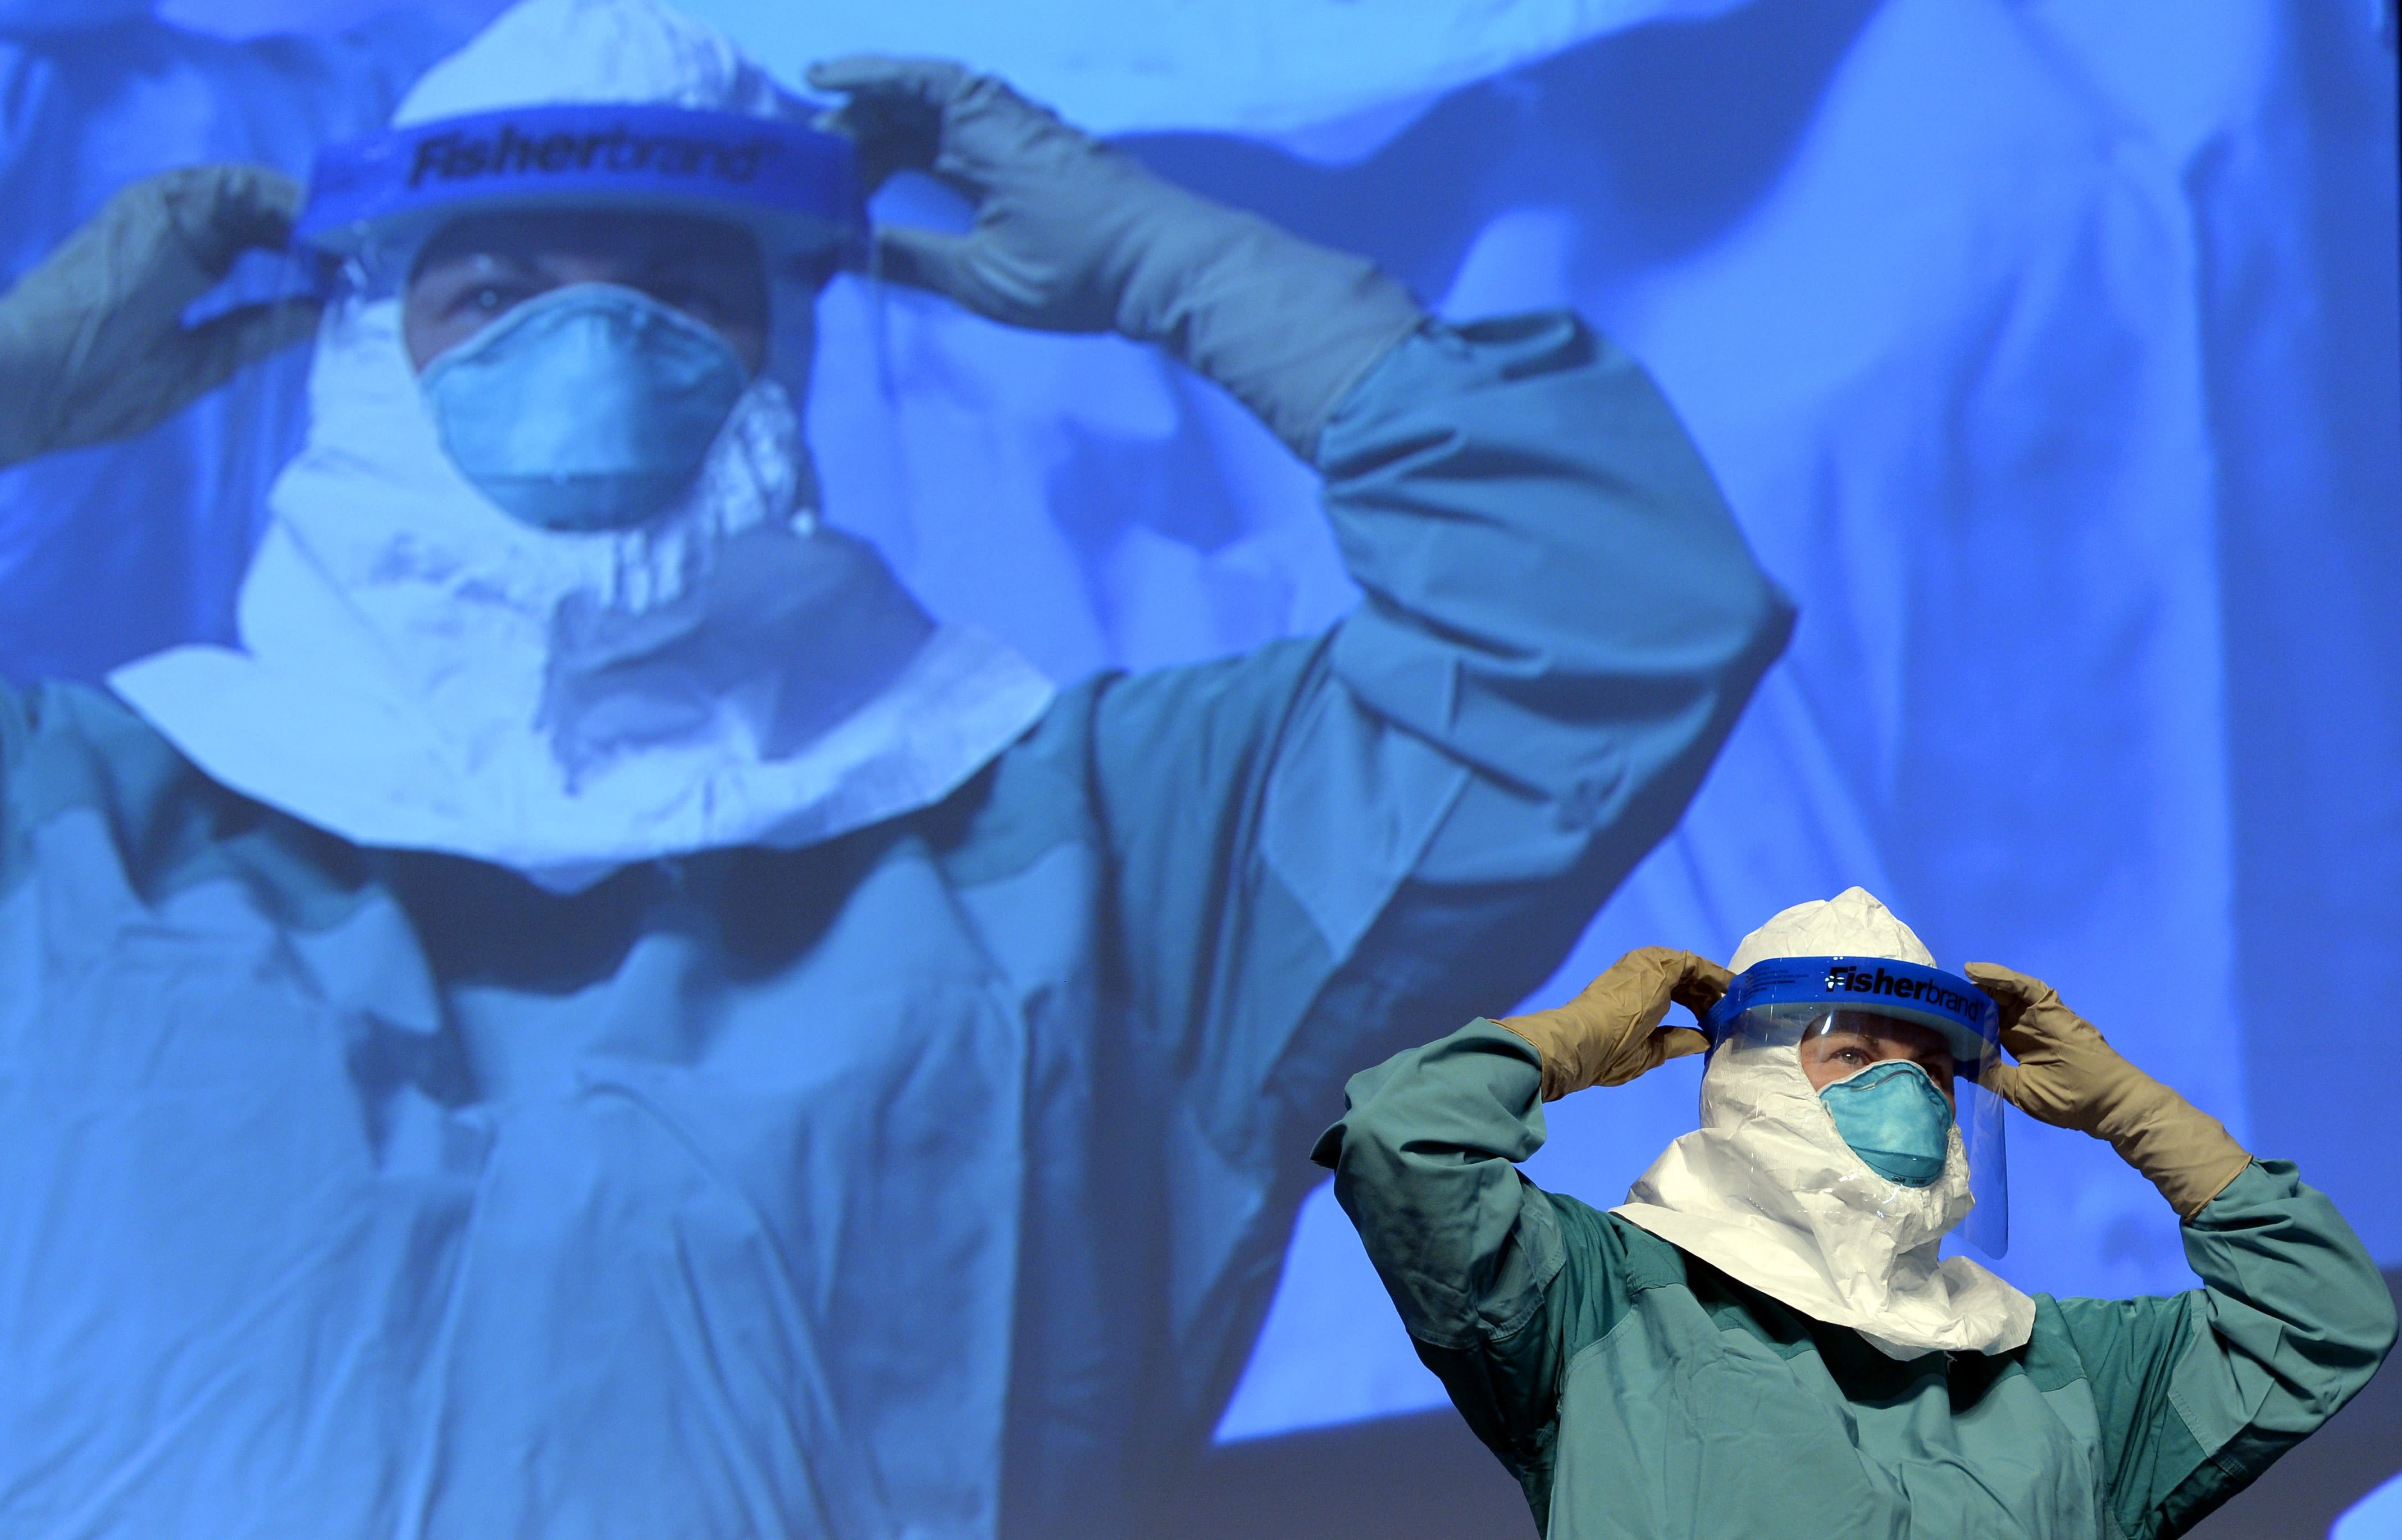 American doctor cured of Ebola finds the virus in eye